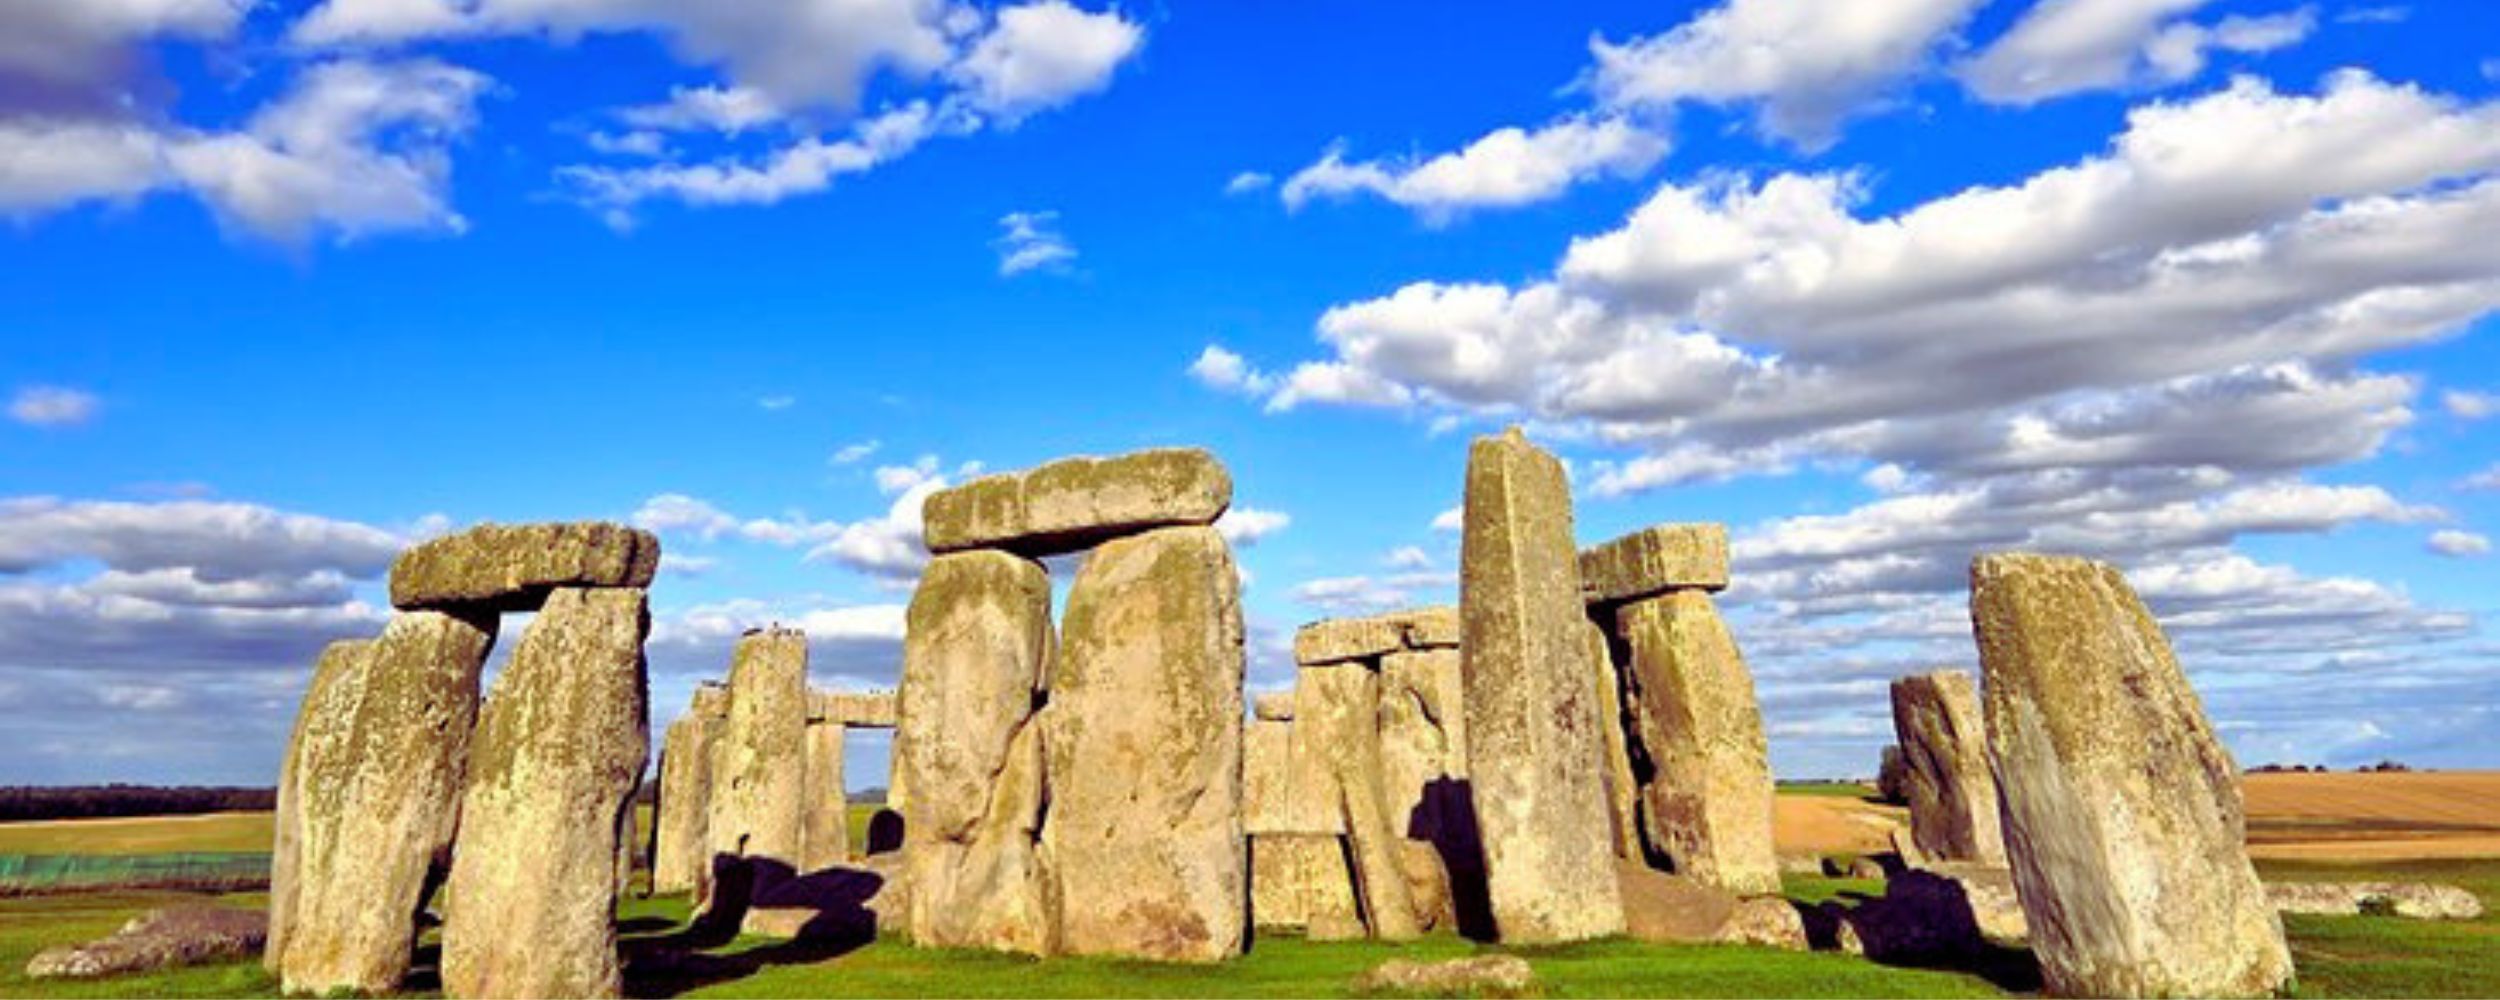 Top 10 Most Visited World Heritage Sites